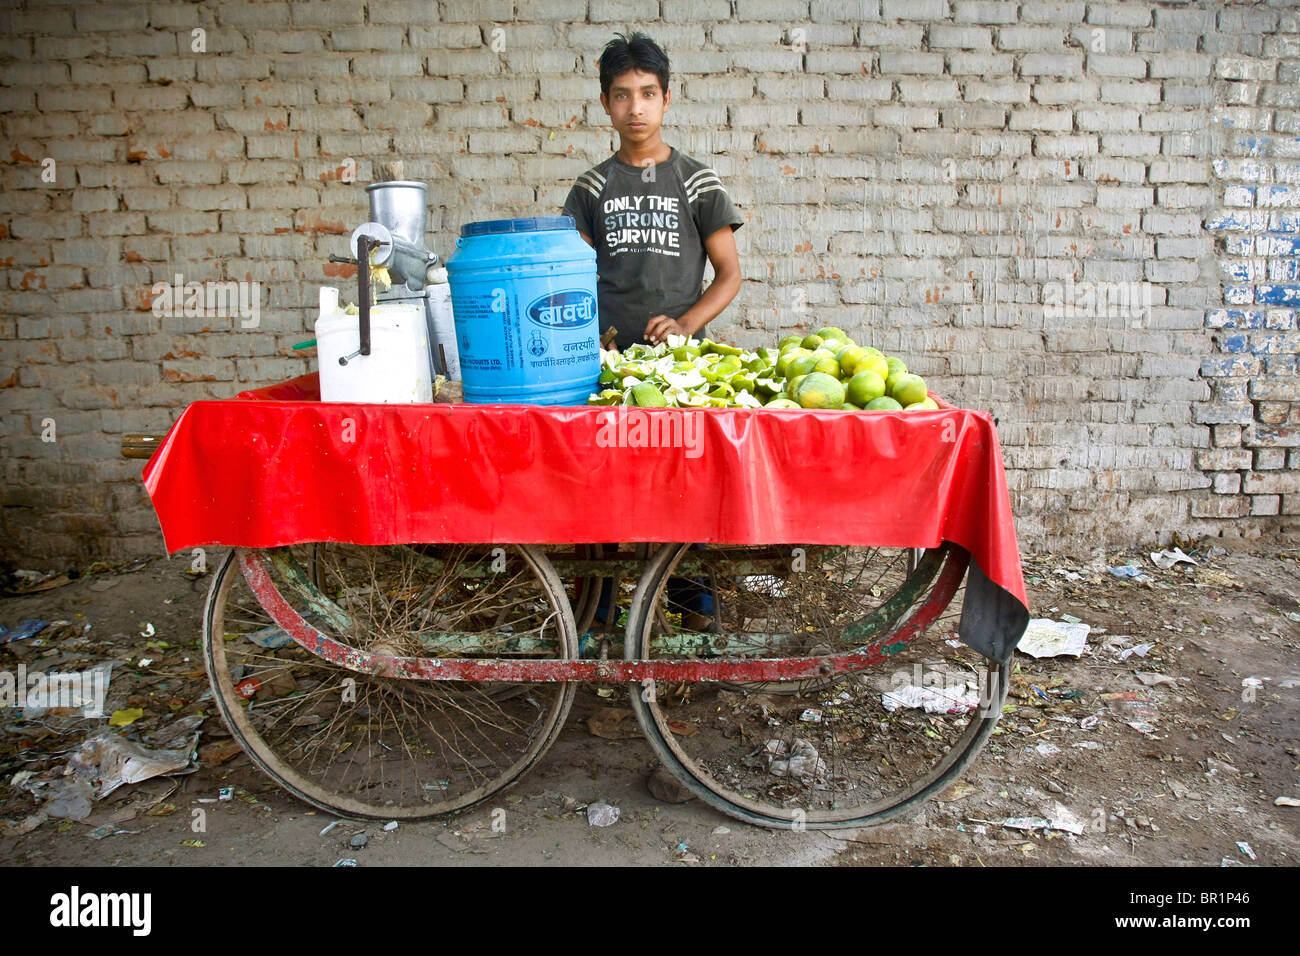 A man sells fresh lemon juice at a street side stall in New Delhi in India Stock Photo